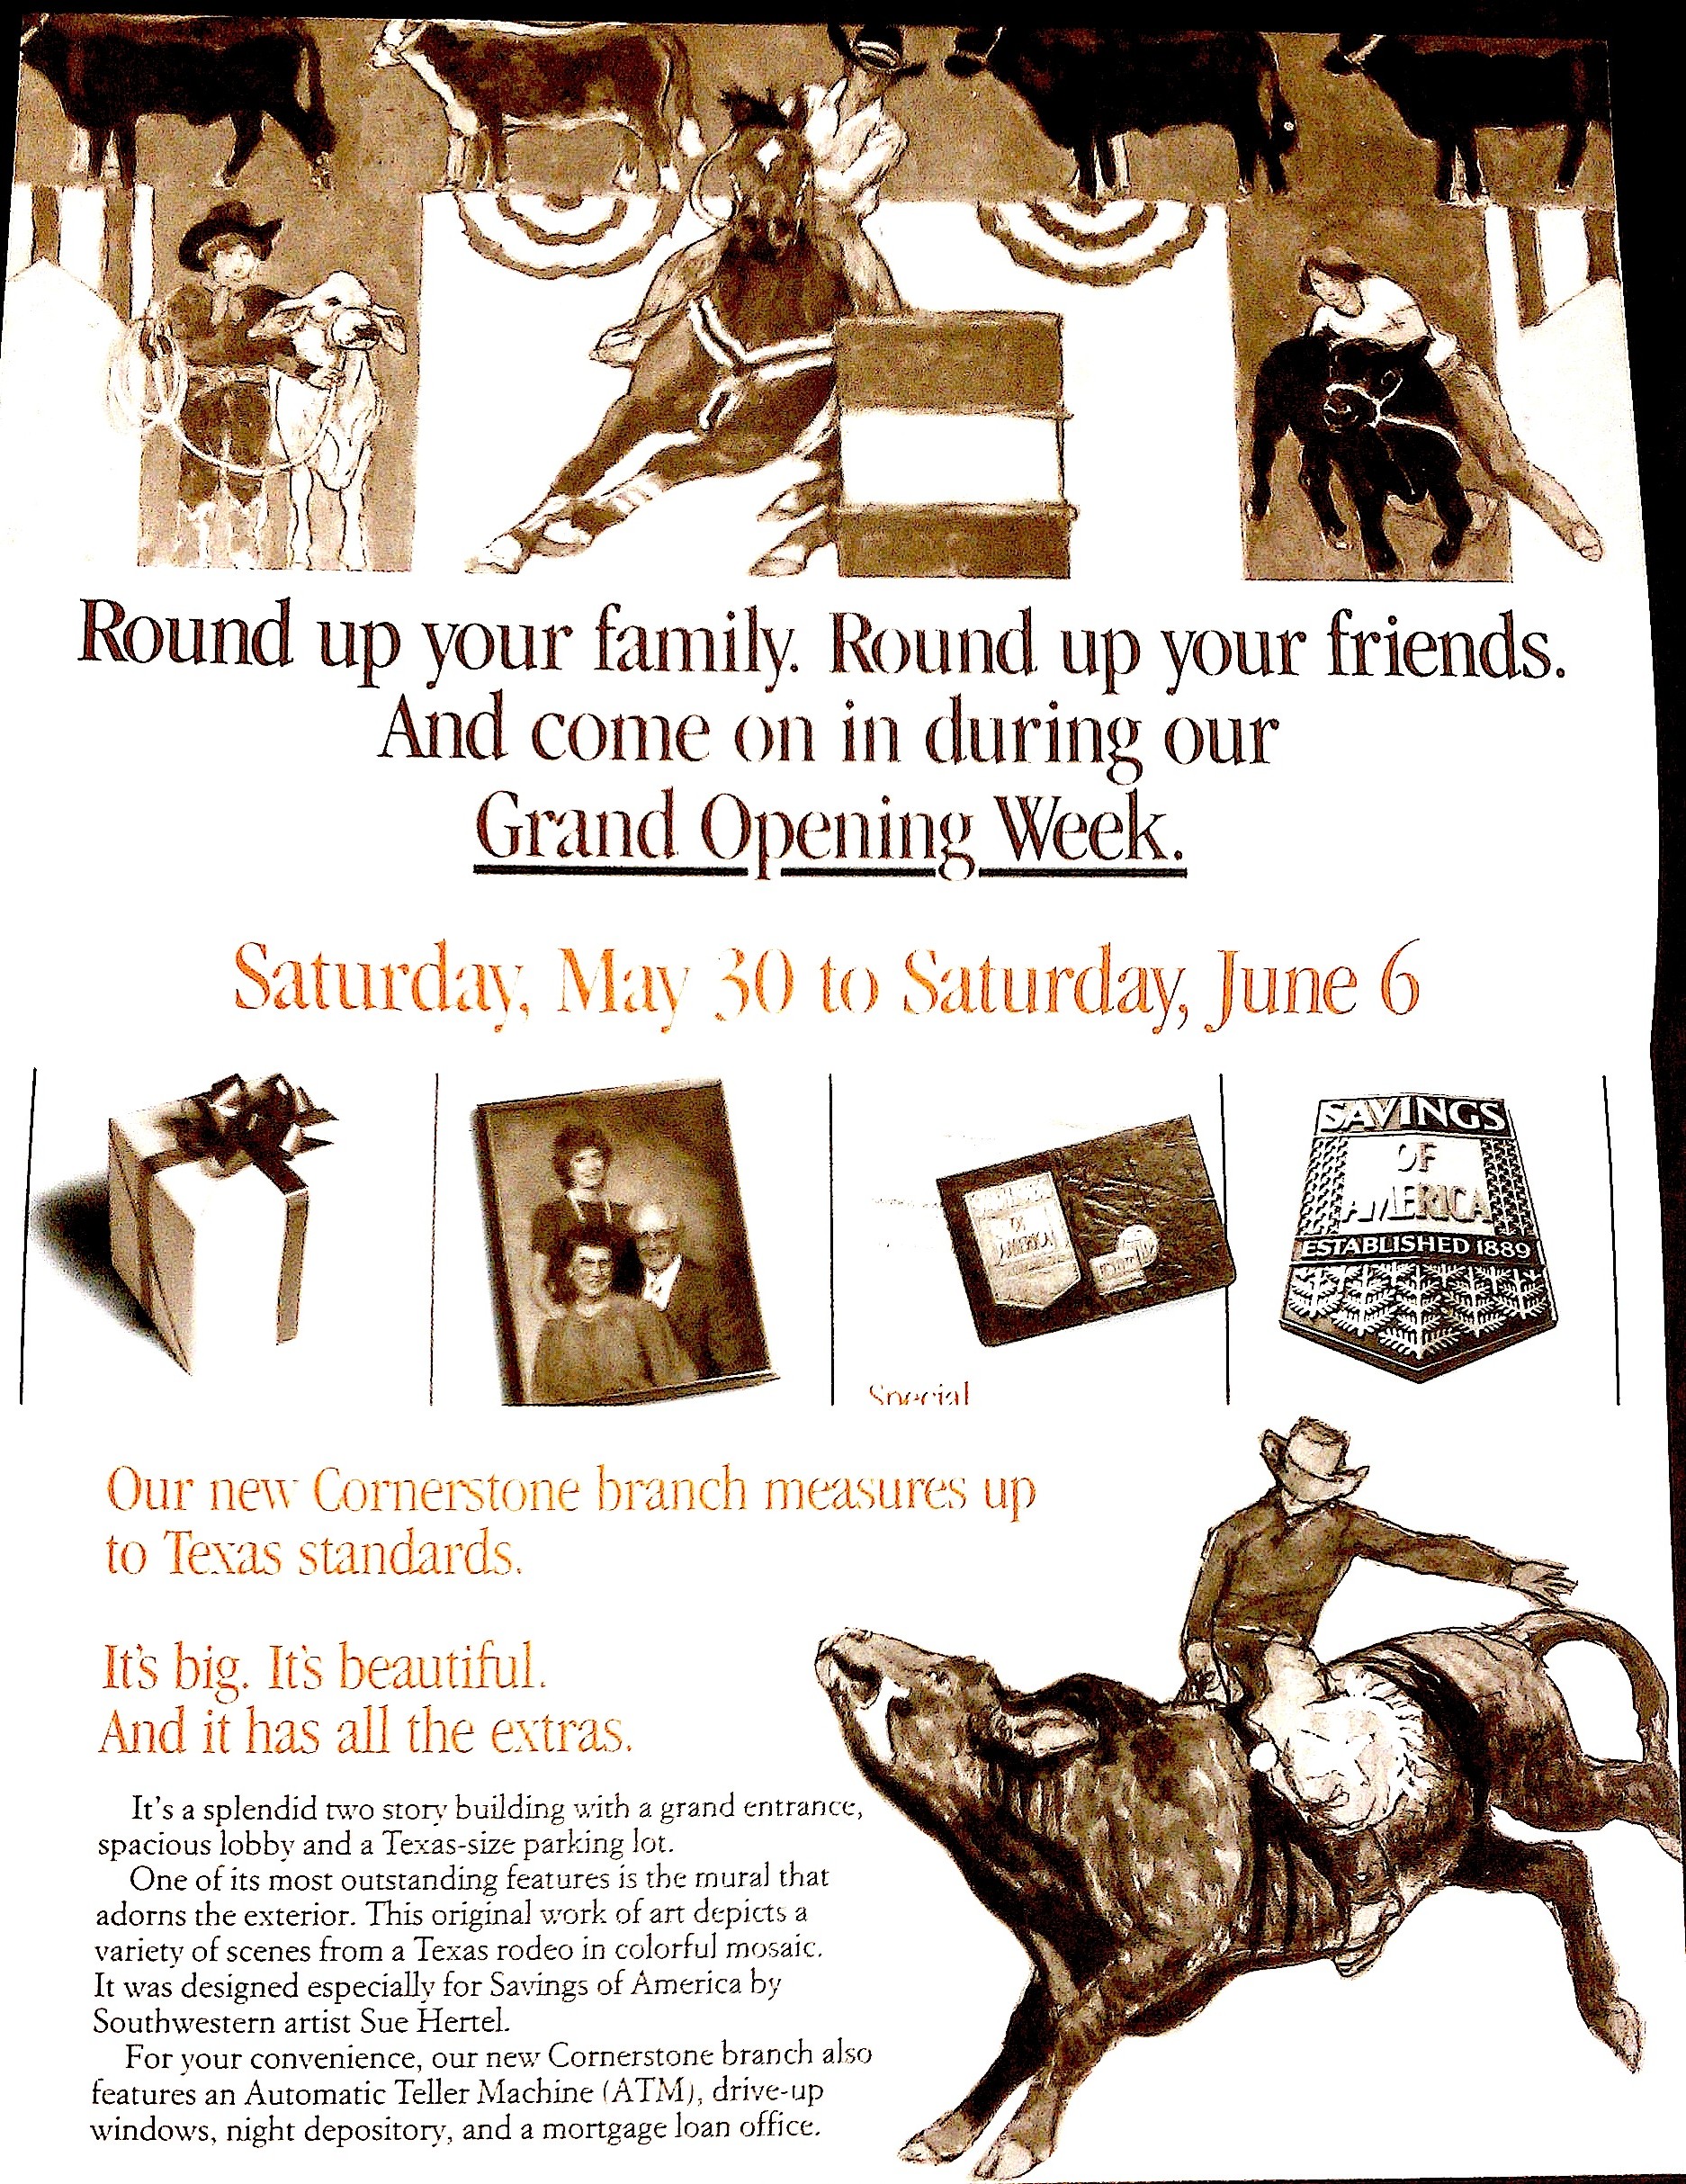 Mailer for the opening of the Cornerstone branch, Houston, Texas, 1987; Denis O'Connor Collection, Huntington Library